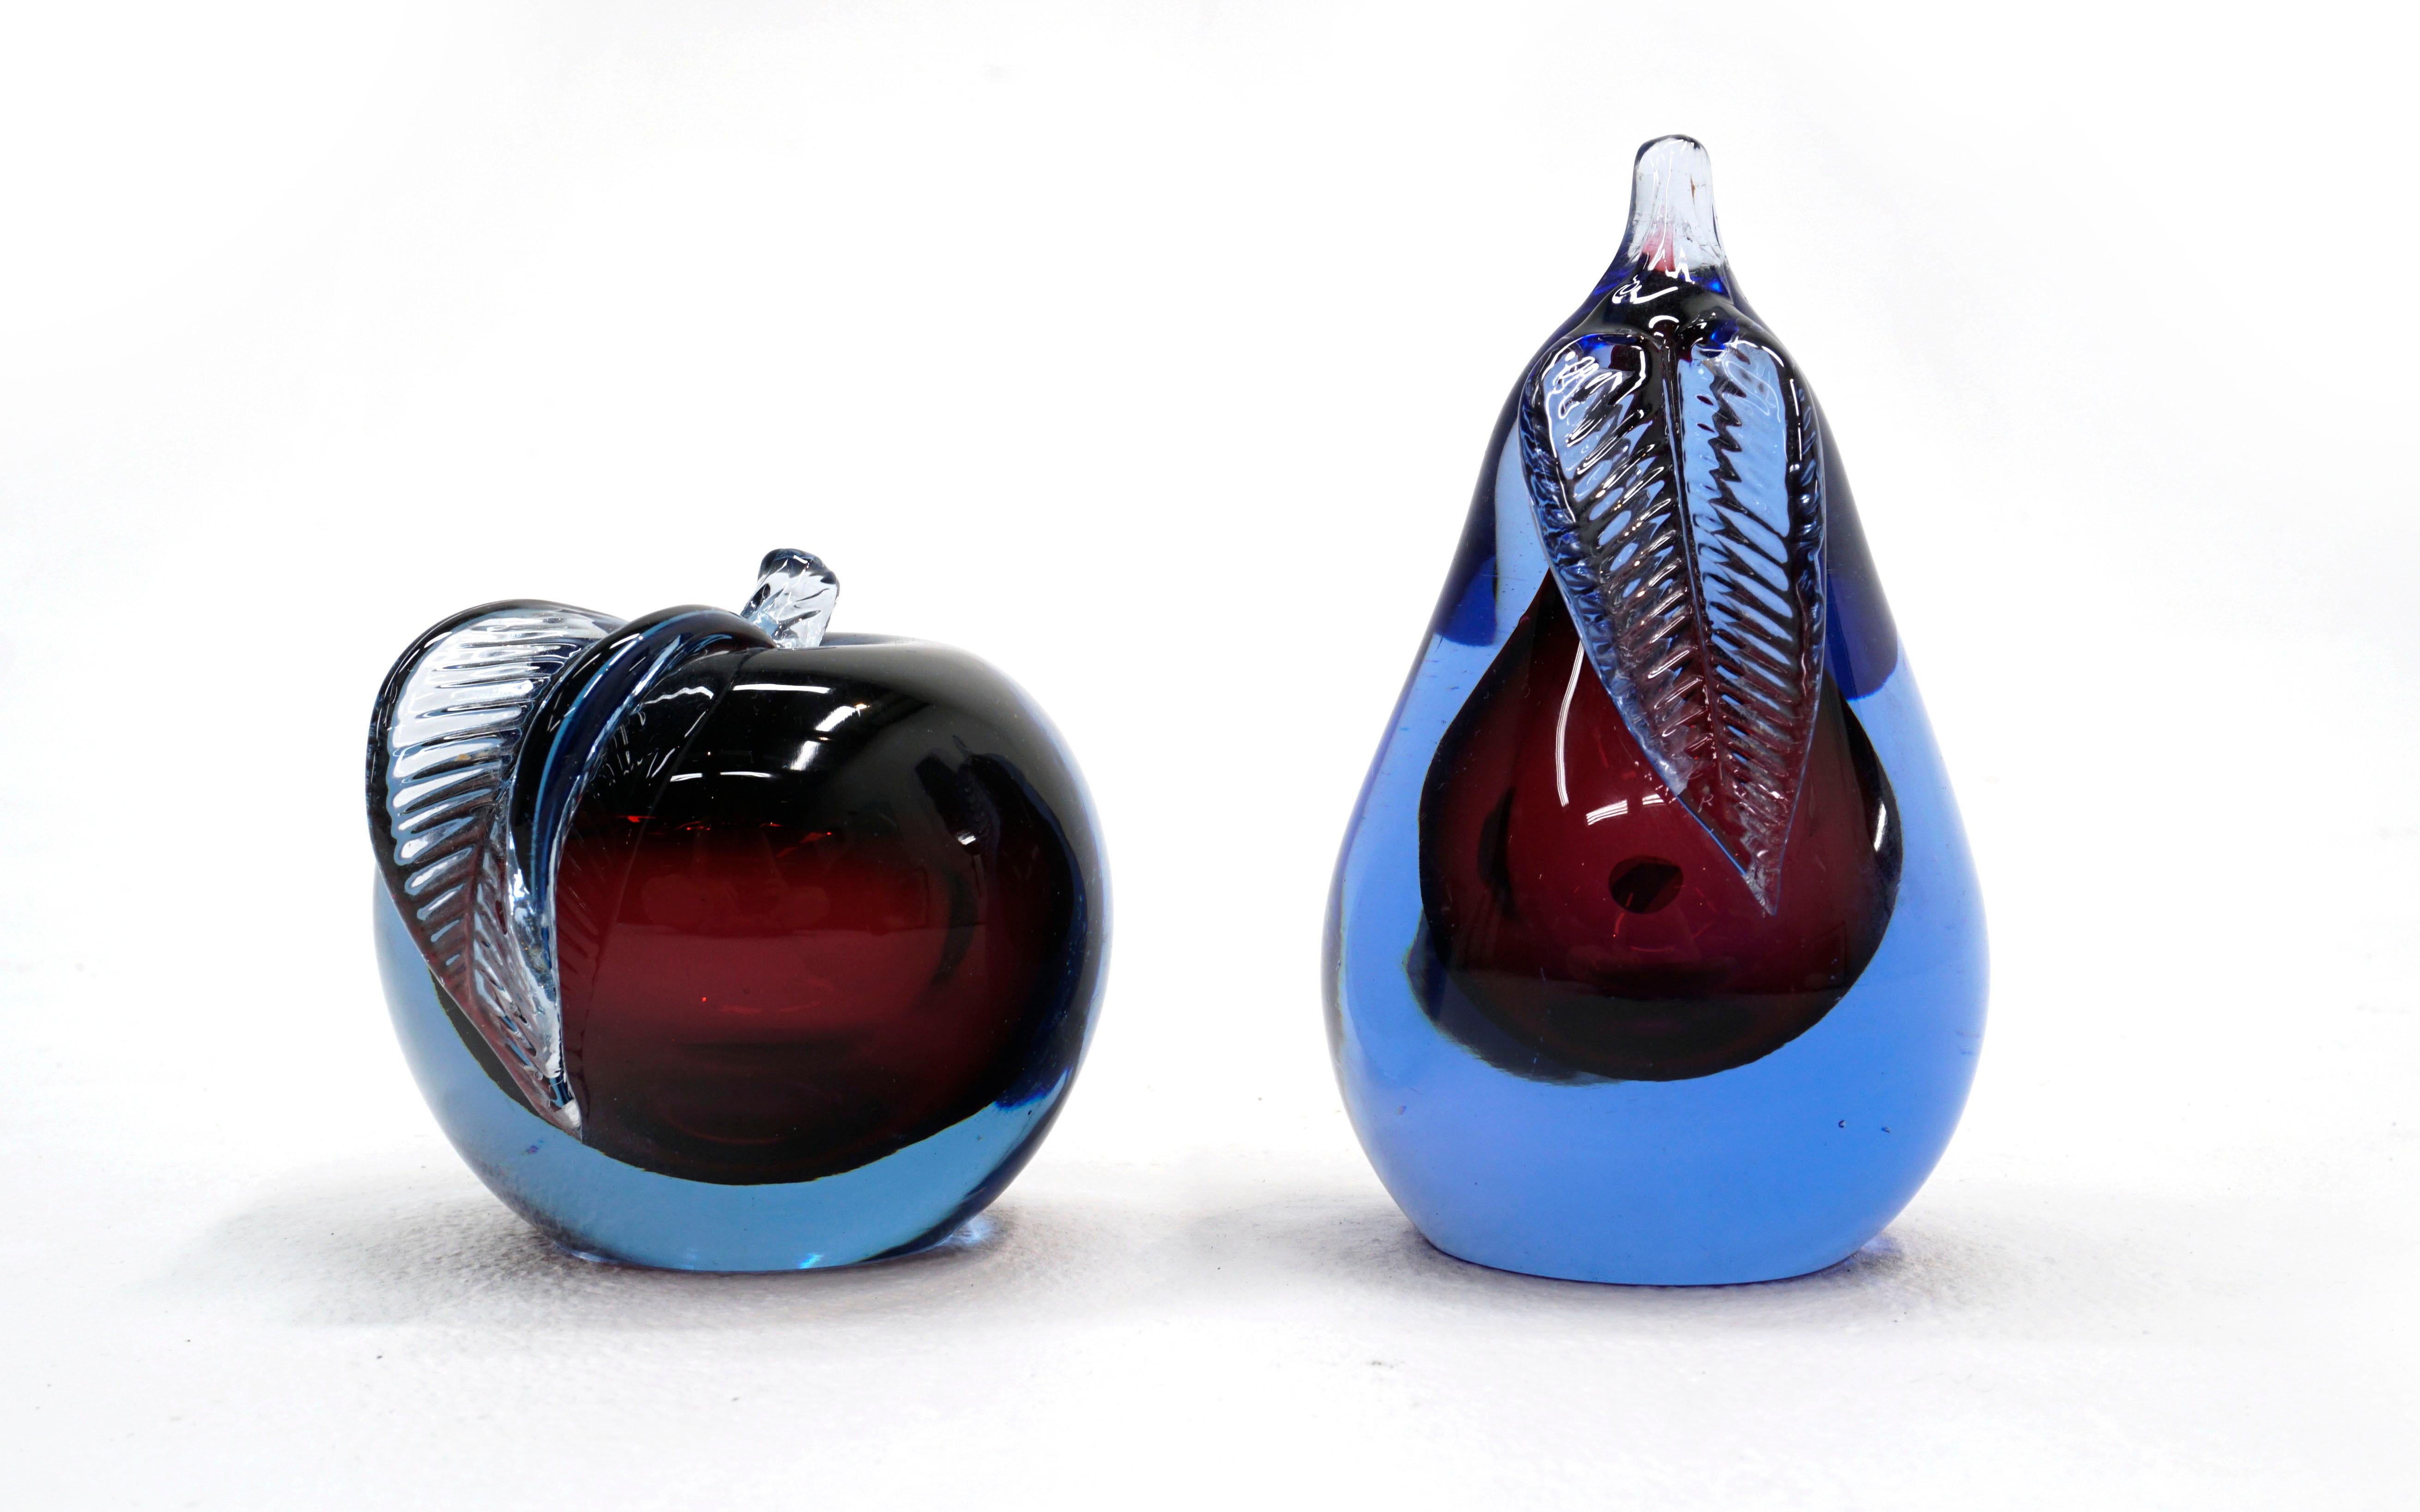 Murano art glass apple and pear Sommerso blue and purple designed by Alfredo Barbini. Both have two flat surfaces for display or can be used as bookends. No chips or repairs. May show minor wear on flat surfaces.